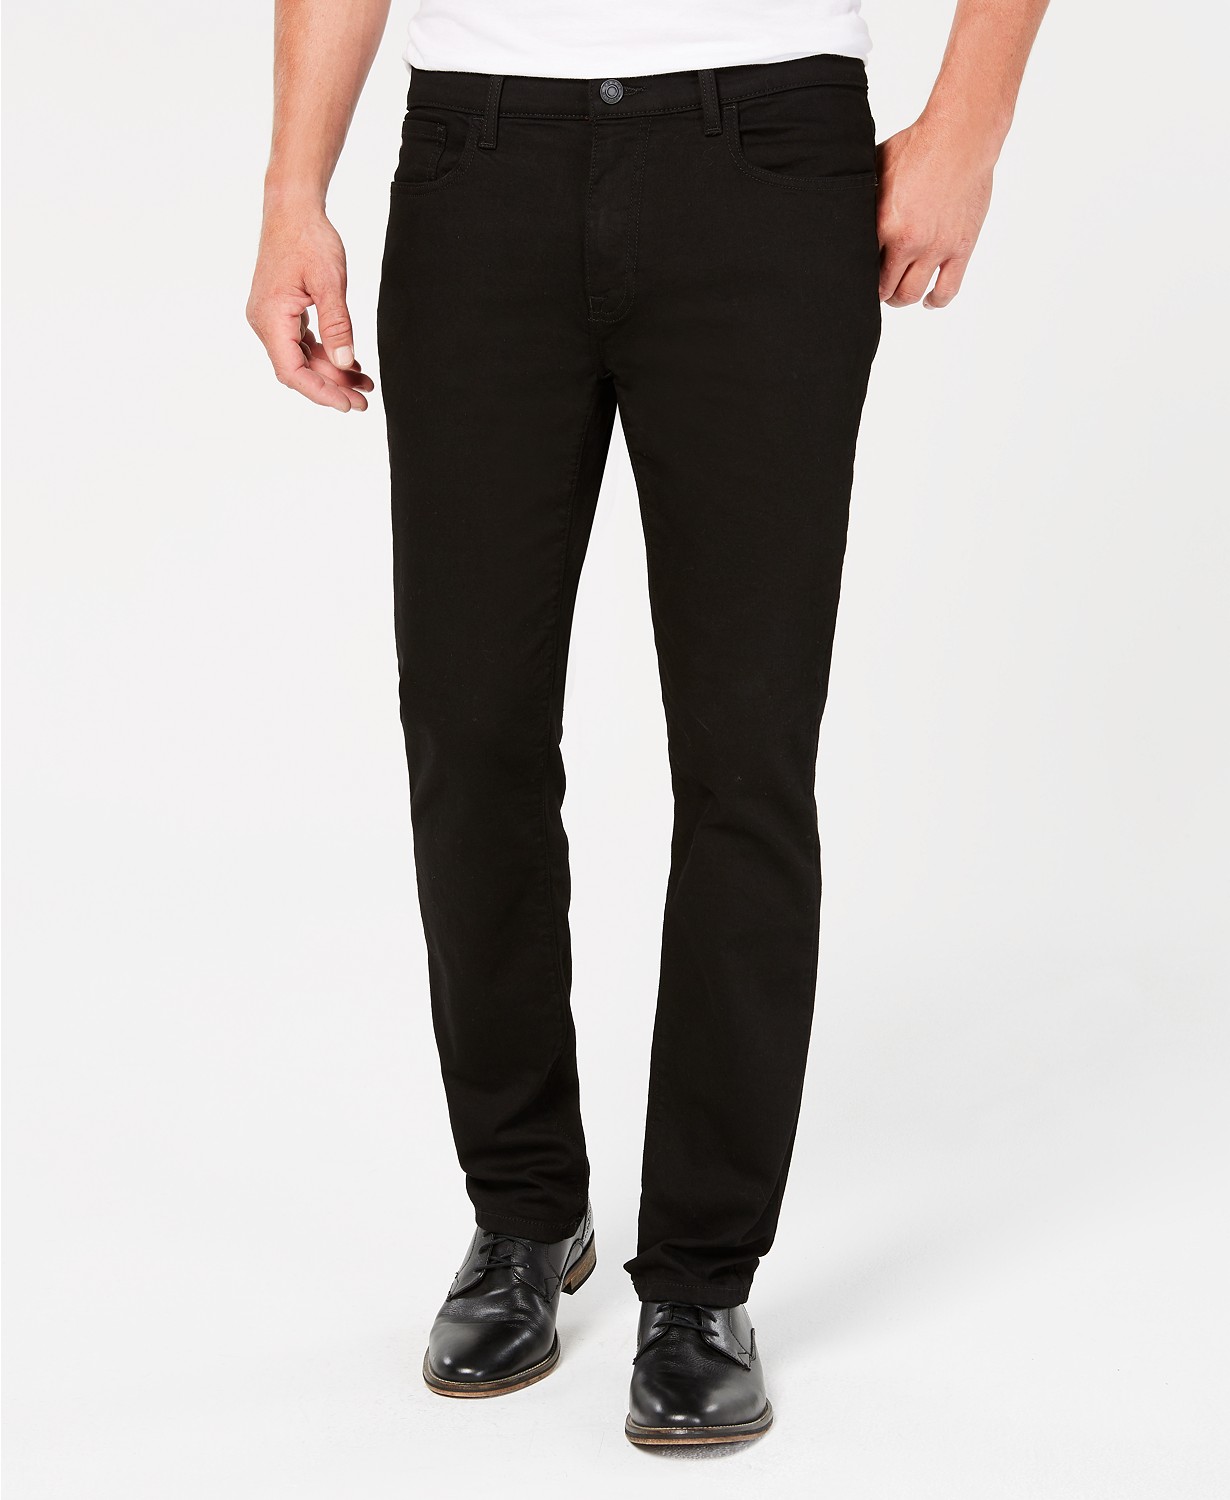 Mens Straight-Fit Stretch Jeans